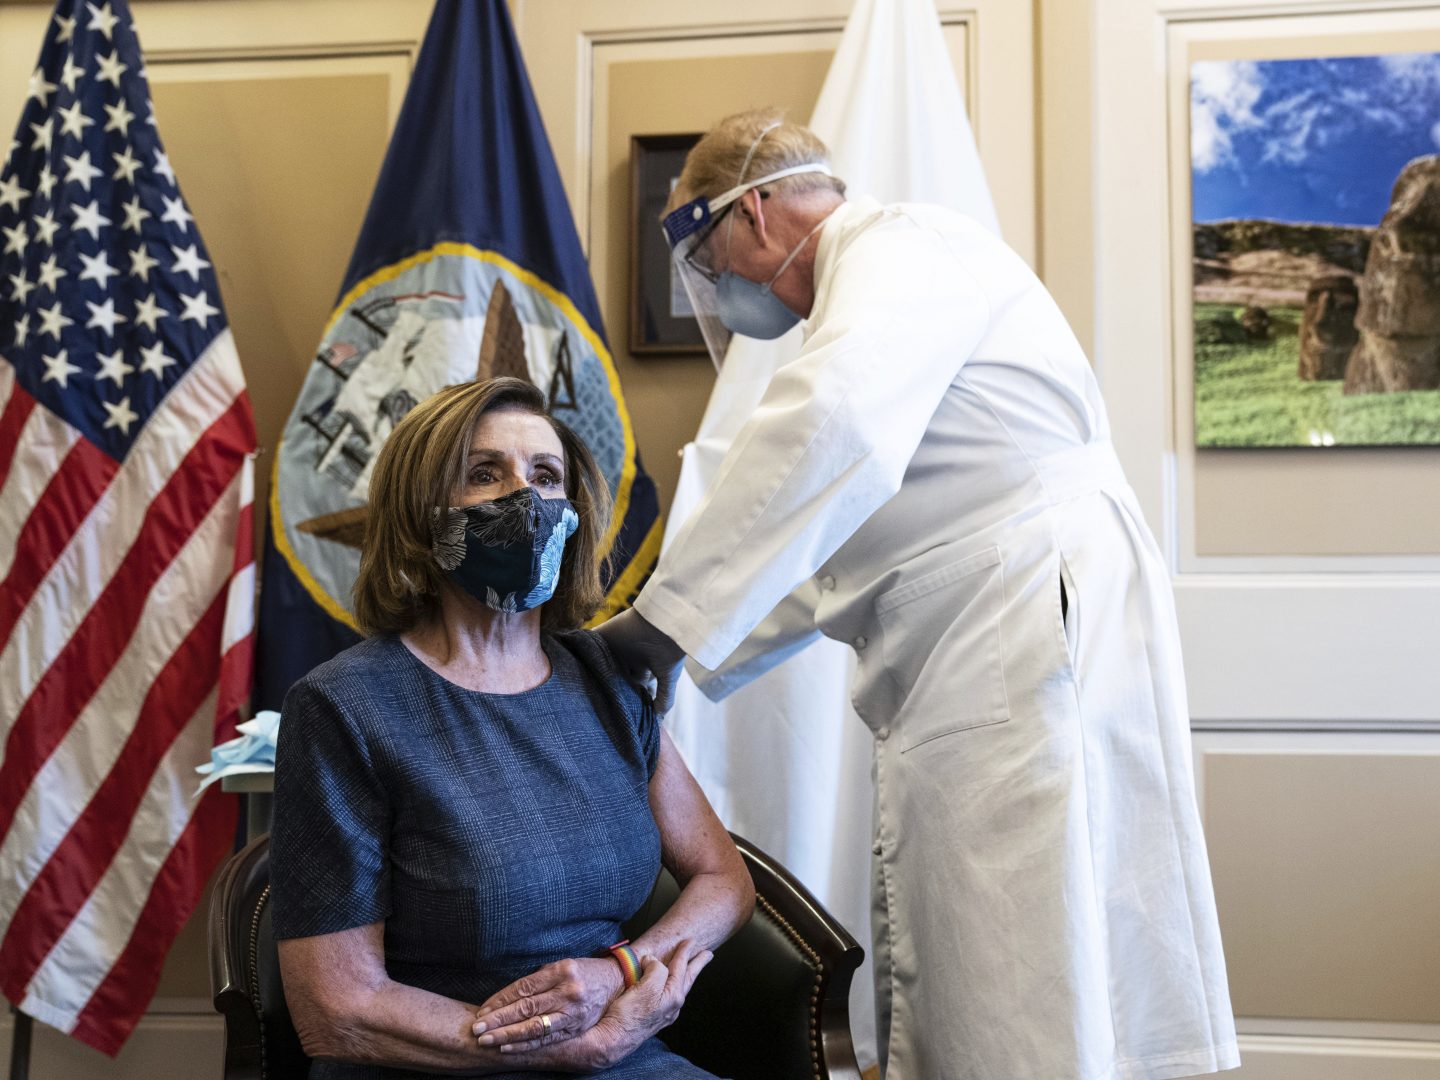 Speaker of the House Nancy Pelosi, D-Calif., receives a Pfizer-BioNTech COVID-19 vaccine shot by Dr. Brian Monahan, attending physician Congress of the United States in Washington, Friday, Dec. 18, 2020. 